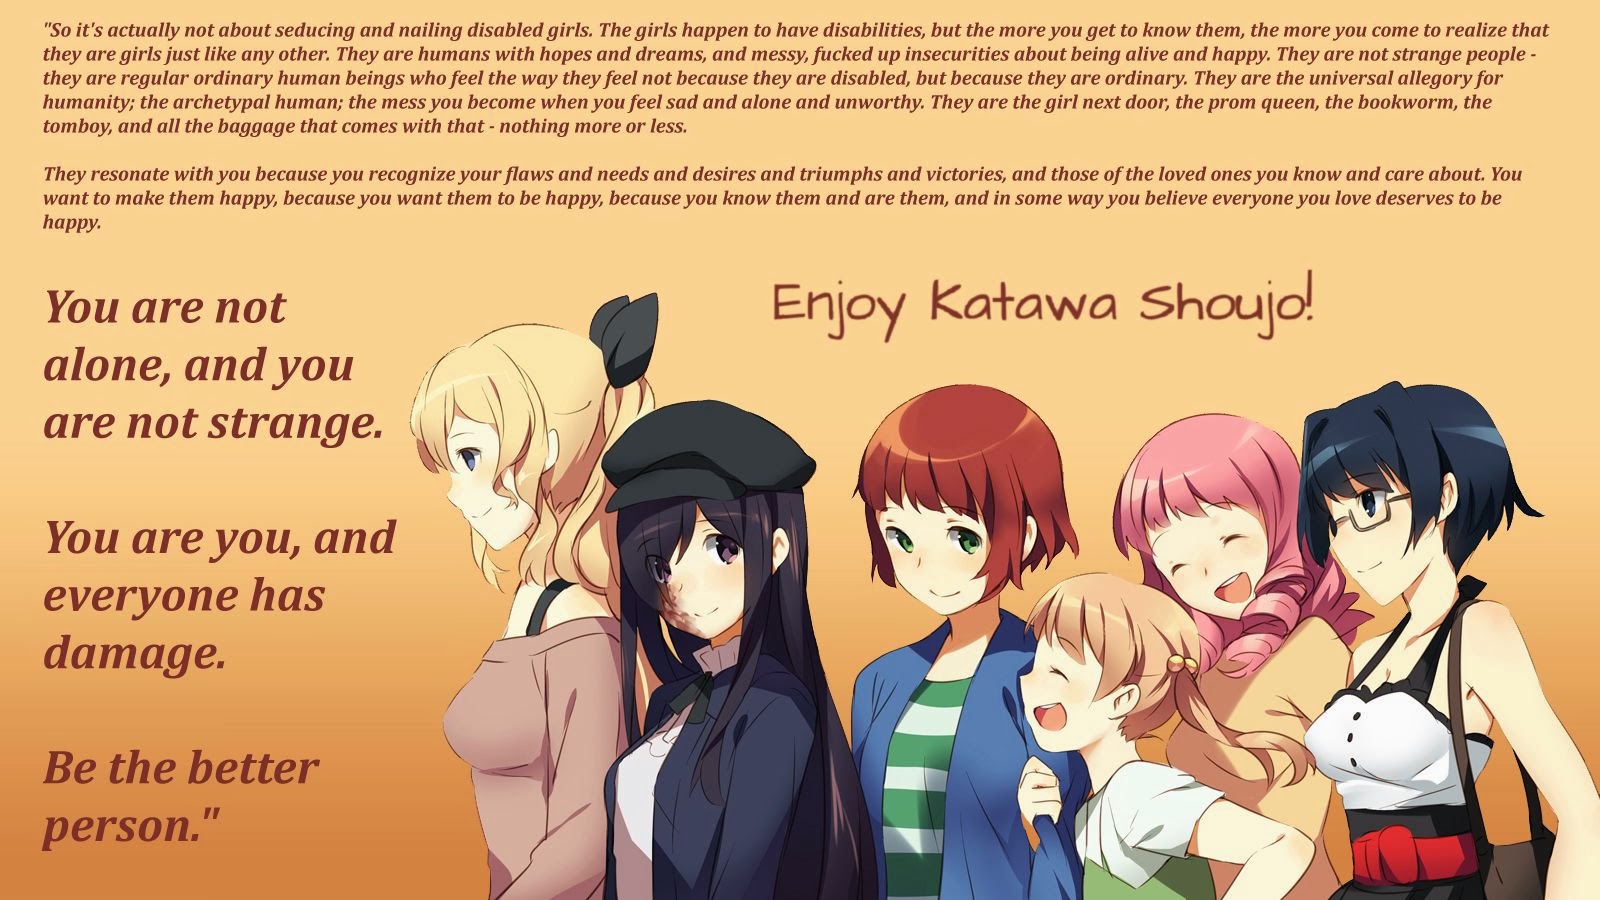 The Bottom Feeder Katawa Shoujo, Sex Stuff in Games, and Choosing What You Are Allowed To photo